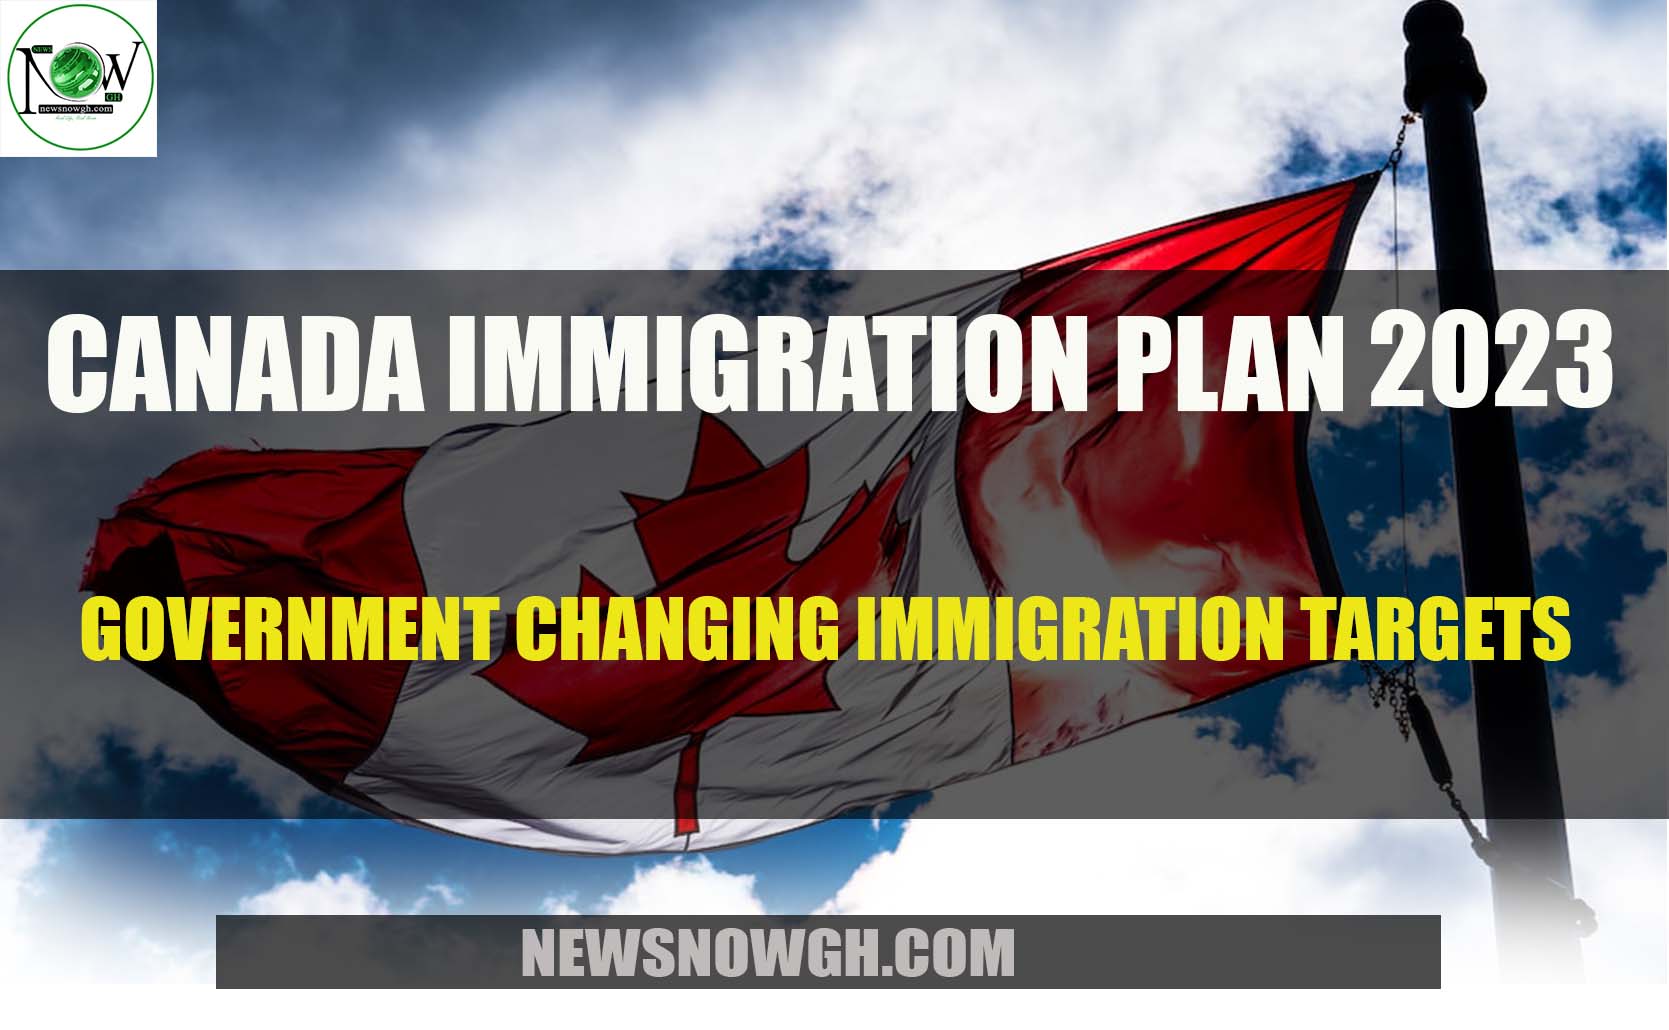 Canada Immigration Plan 2024 Government Immigration Targets